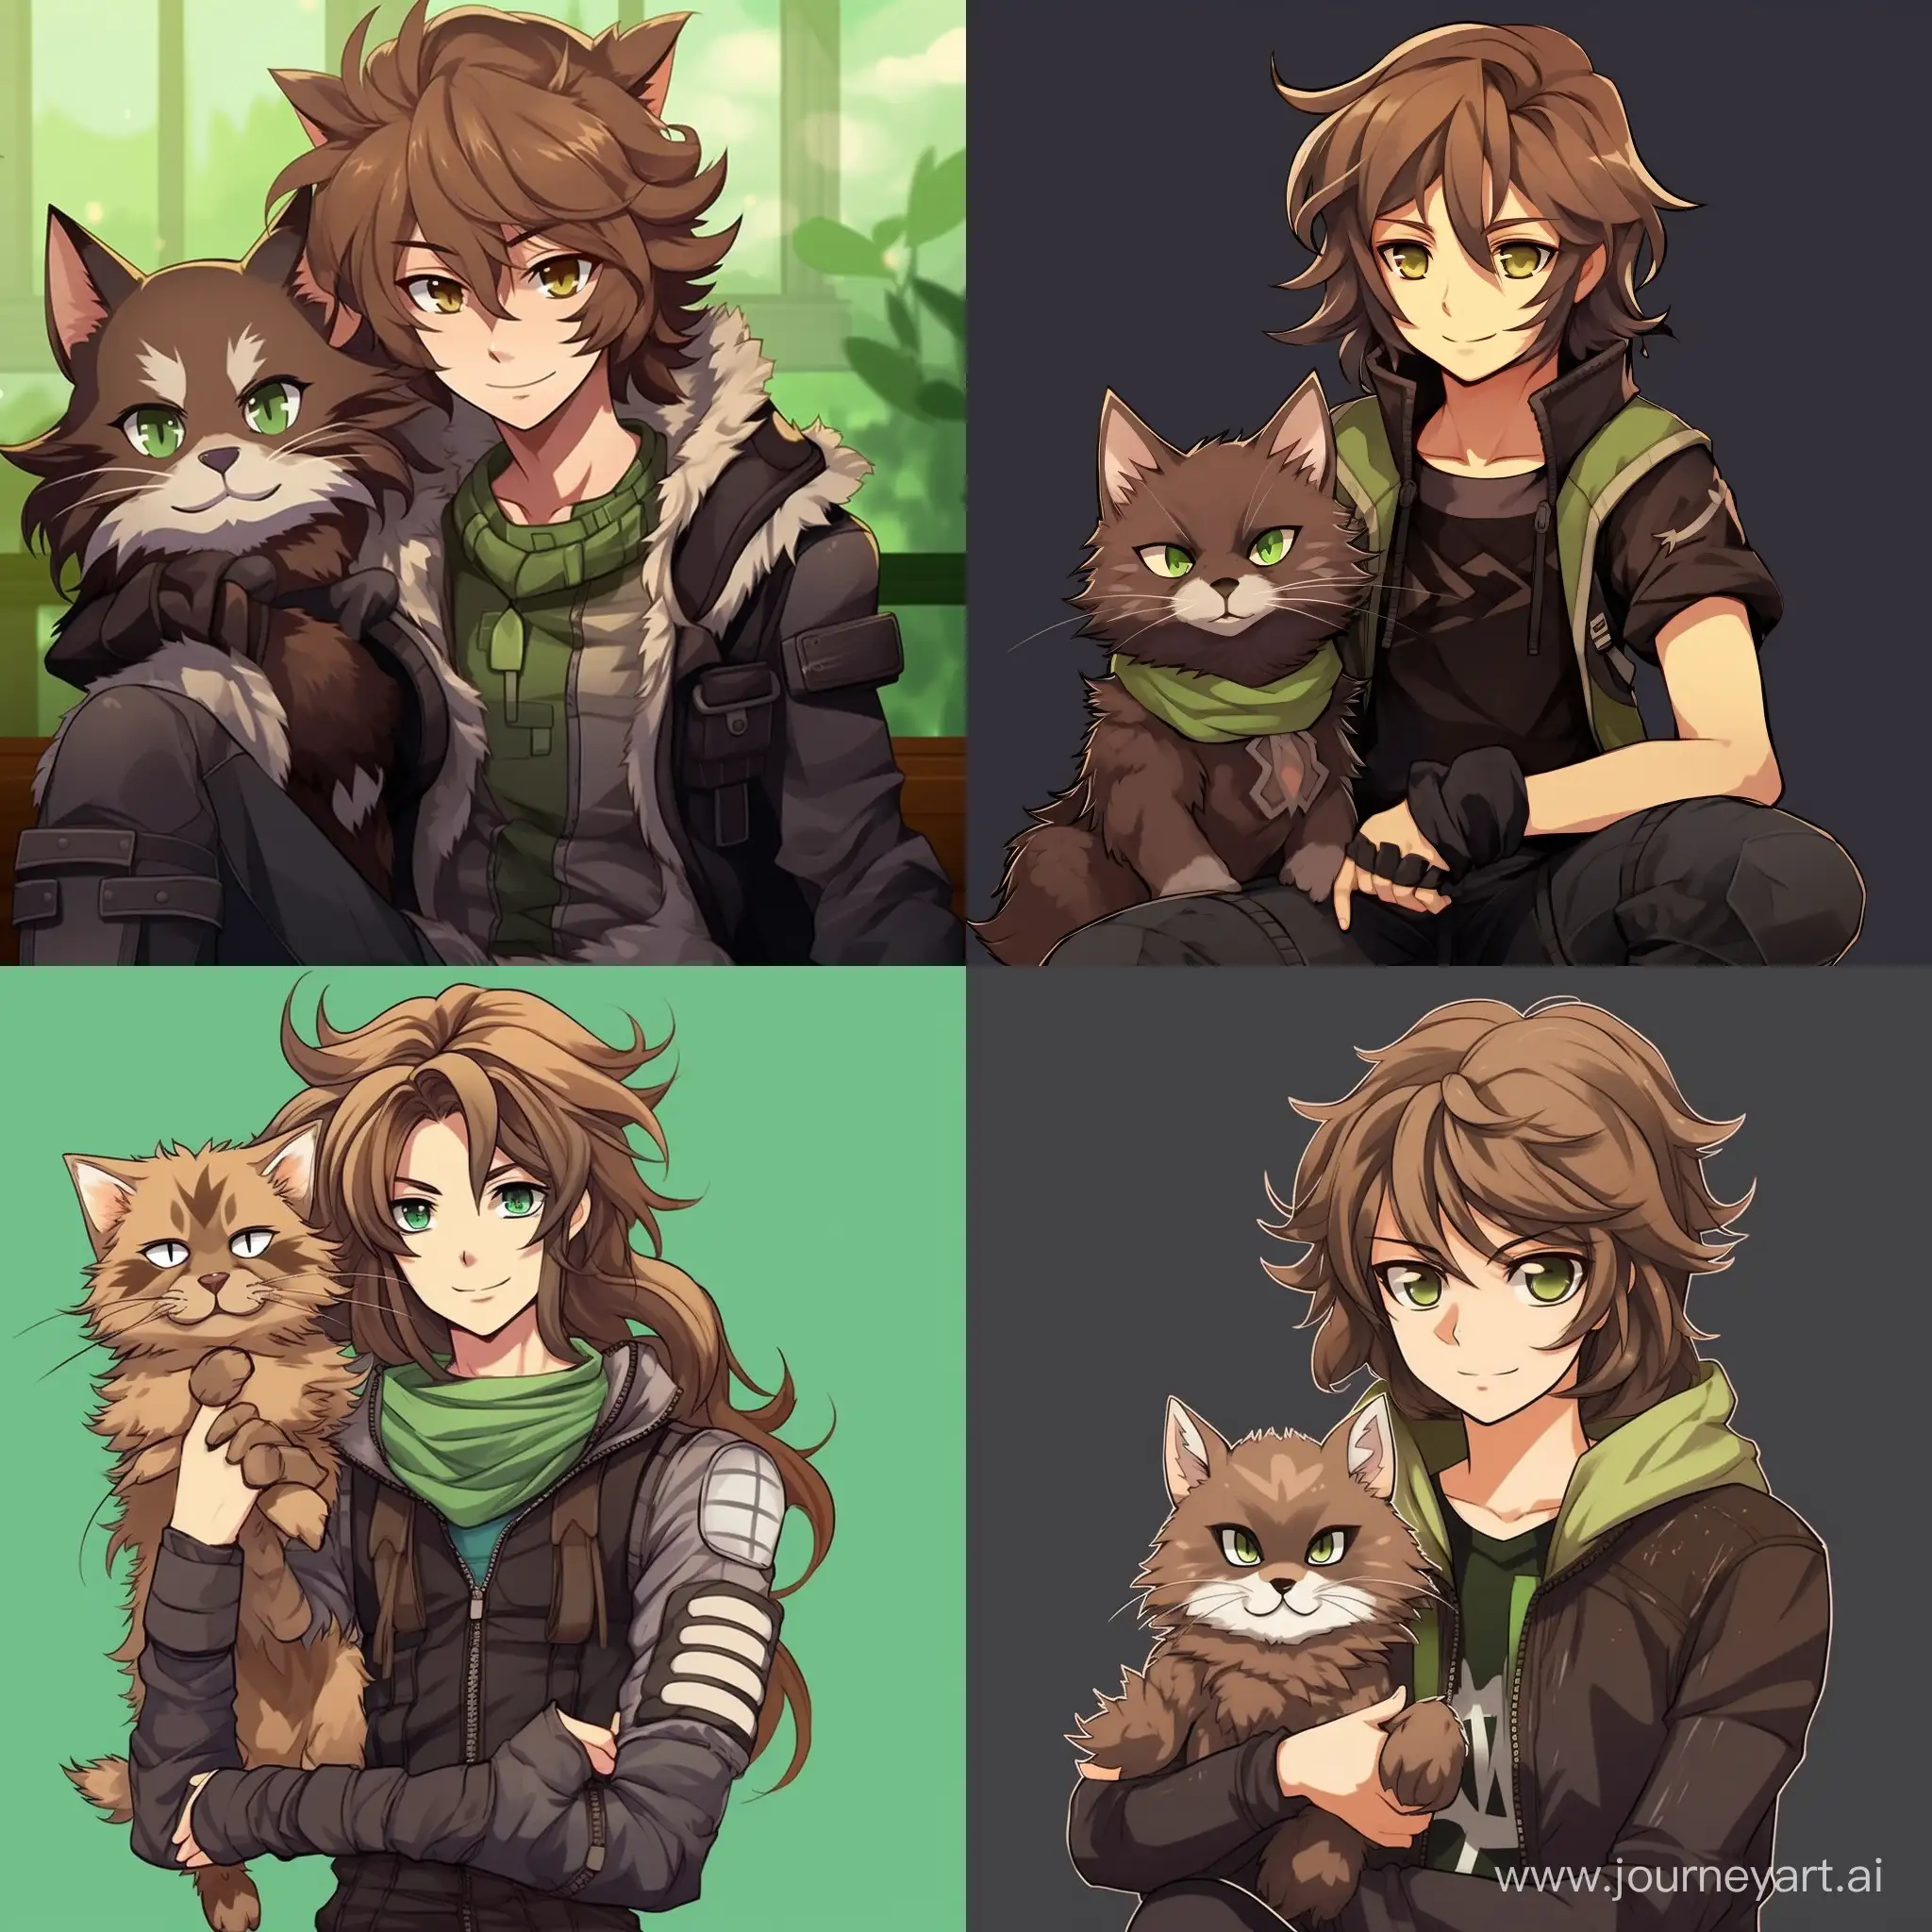 boy, brown long hair, brown cat ears with green fluff inside, green eyes, gray T-shirt on top, gray biker gloves, green fluffy tail, flat background, full body, anime, no outwear